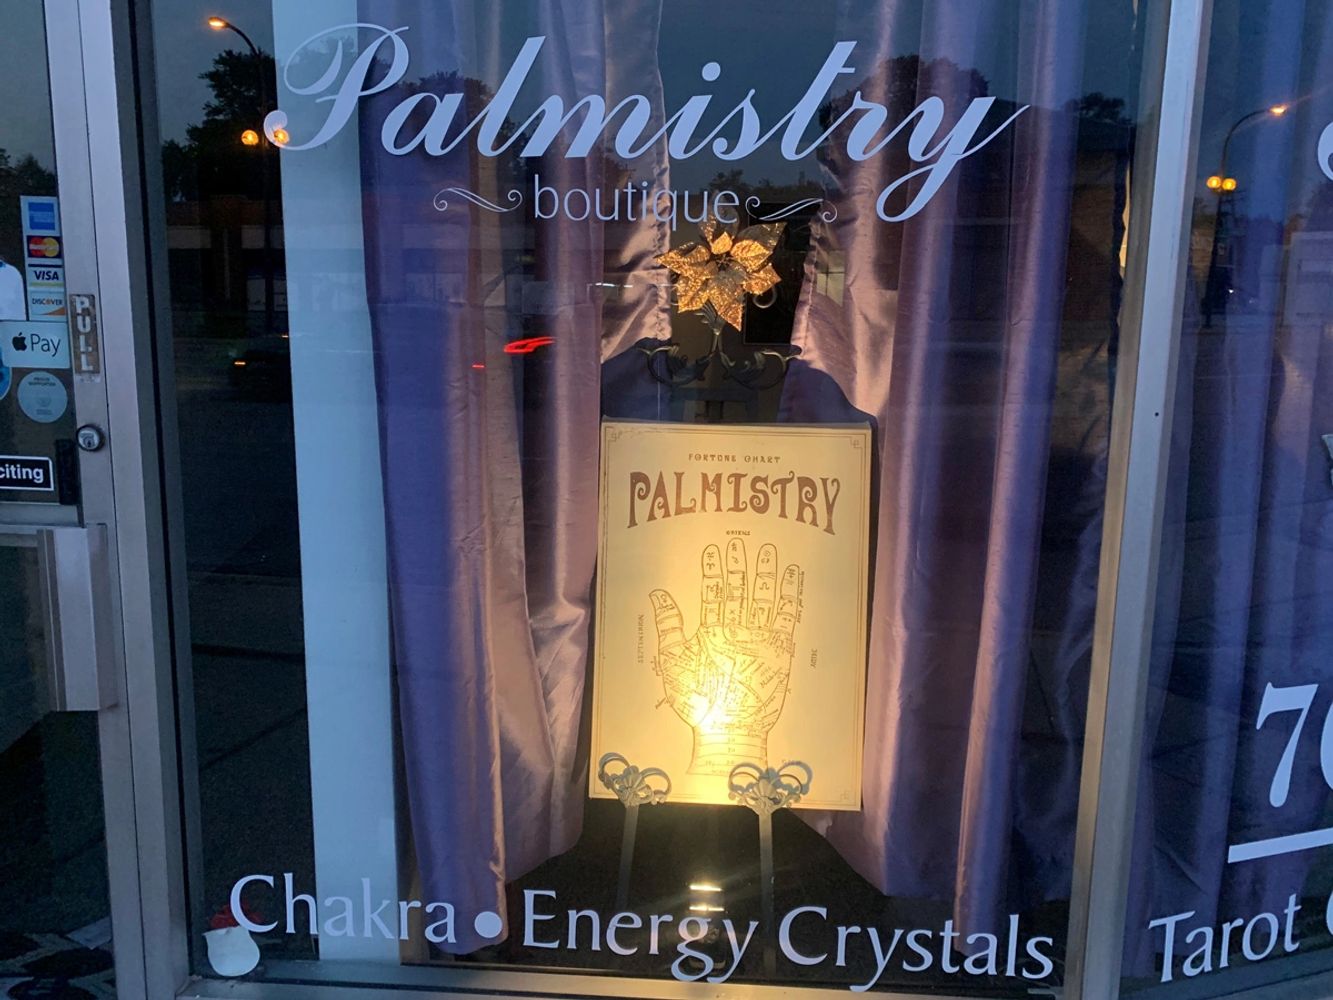 Palmistry Boutique's front window featuring a Palmistry sign, Chakra, Energy Crystals, and Tarot.